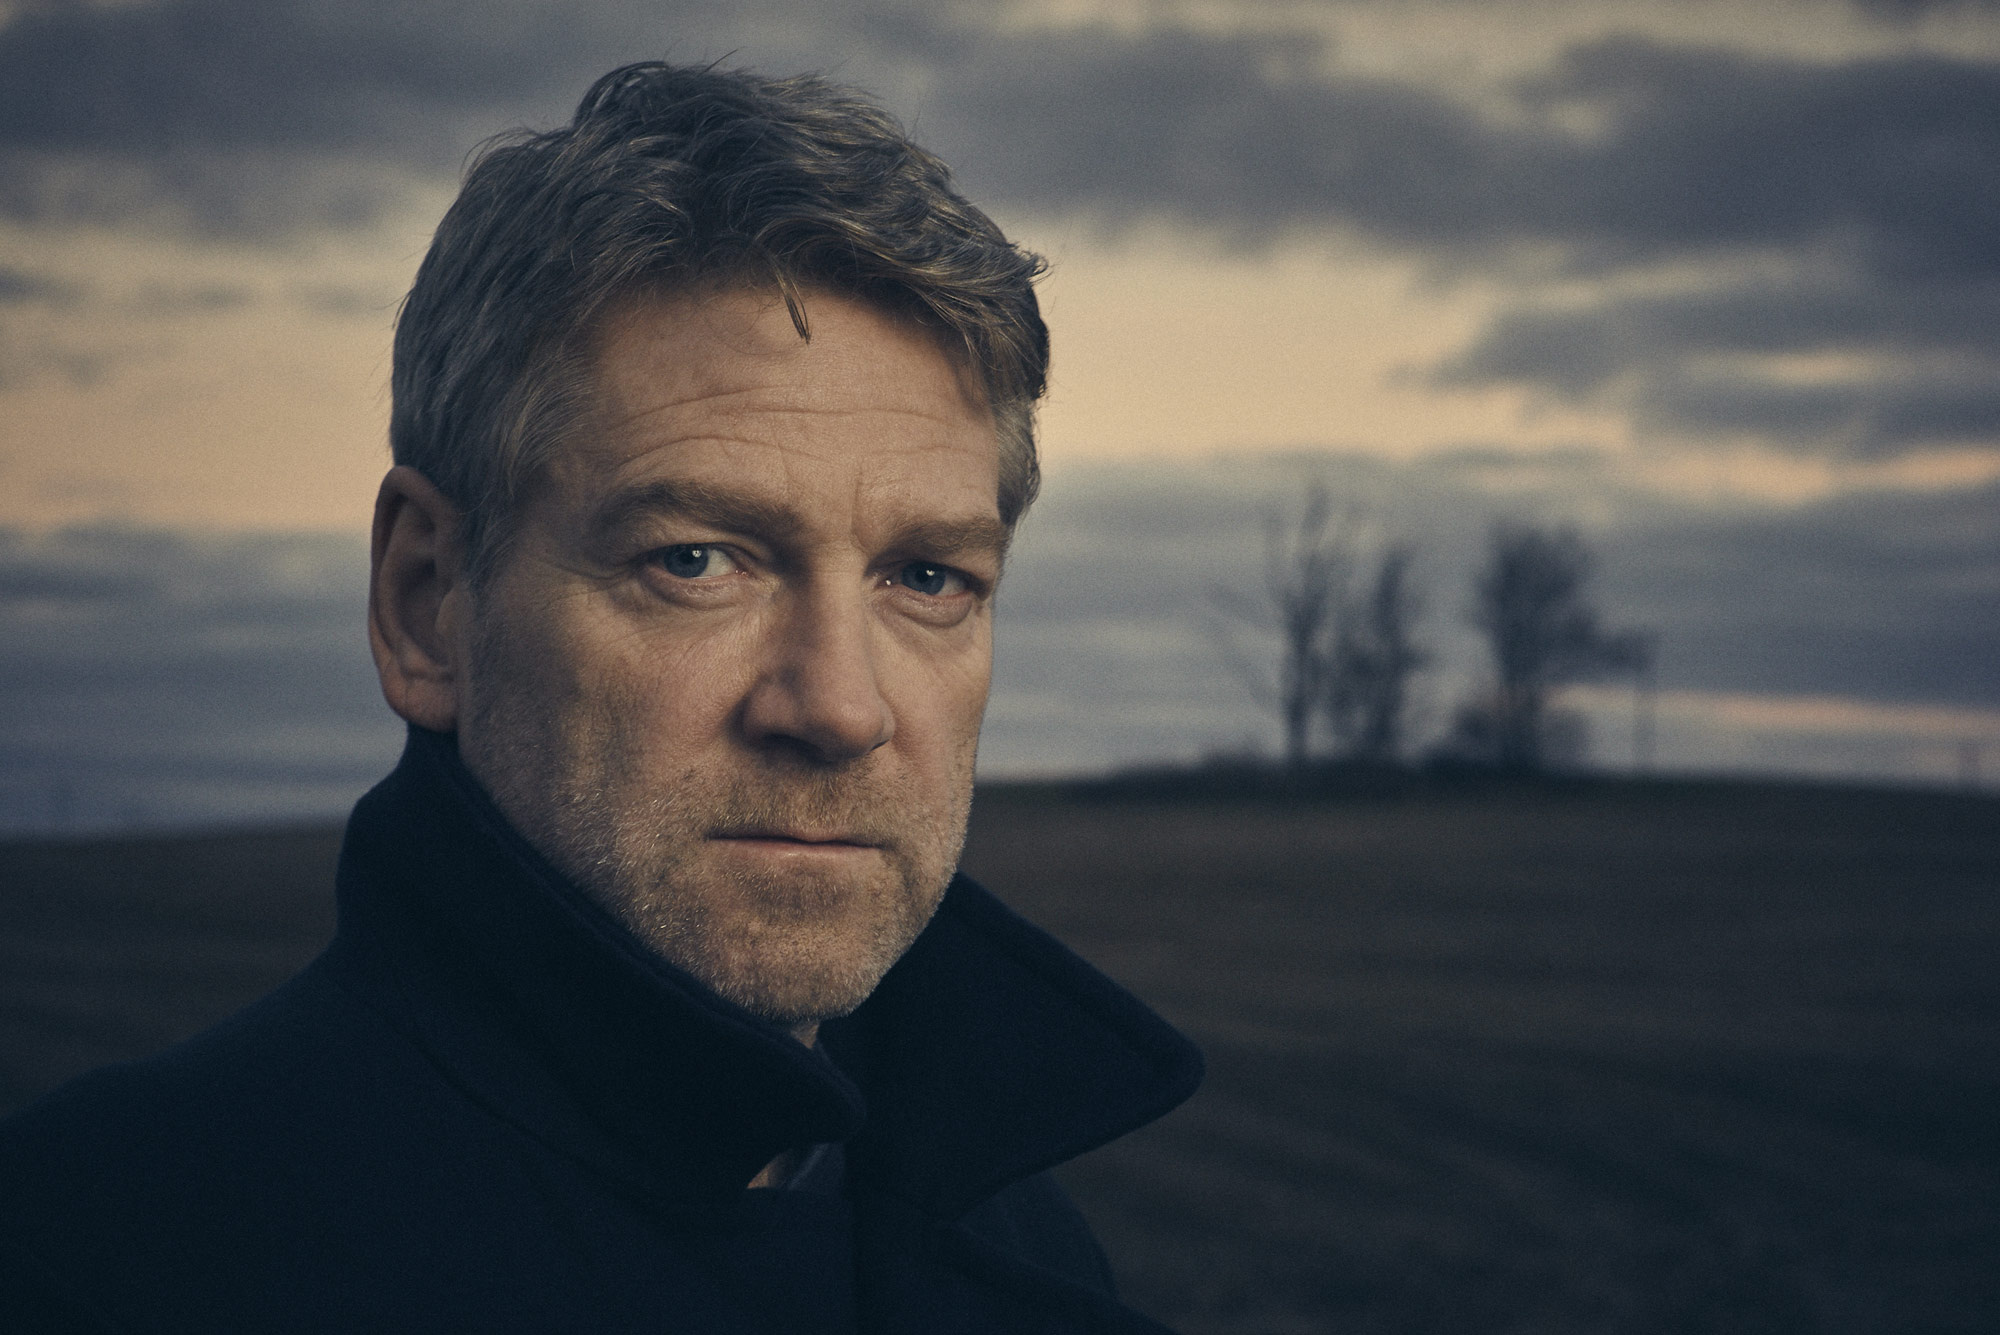 Kenneth Branagh: Academy Awards nominations for Best Actor and Best Director for Henry V. 2000x1340 HD Wallpaper.